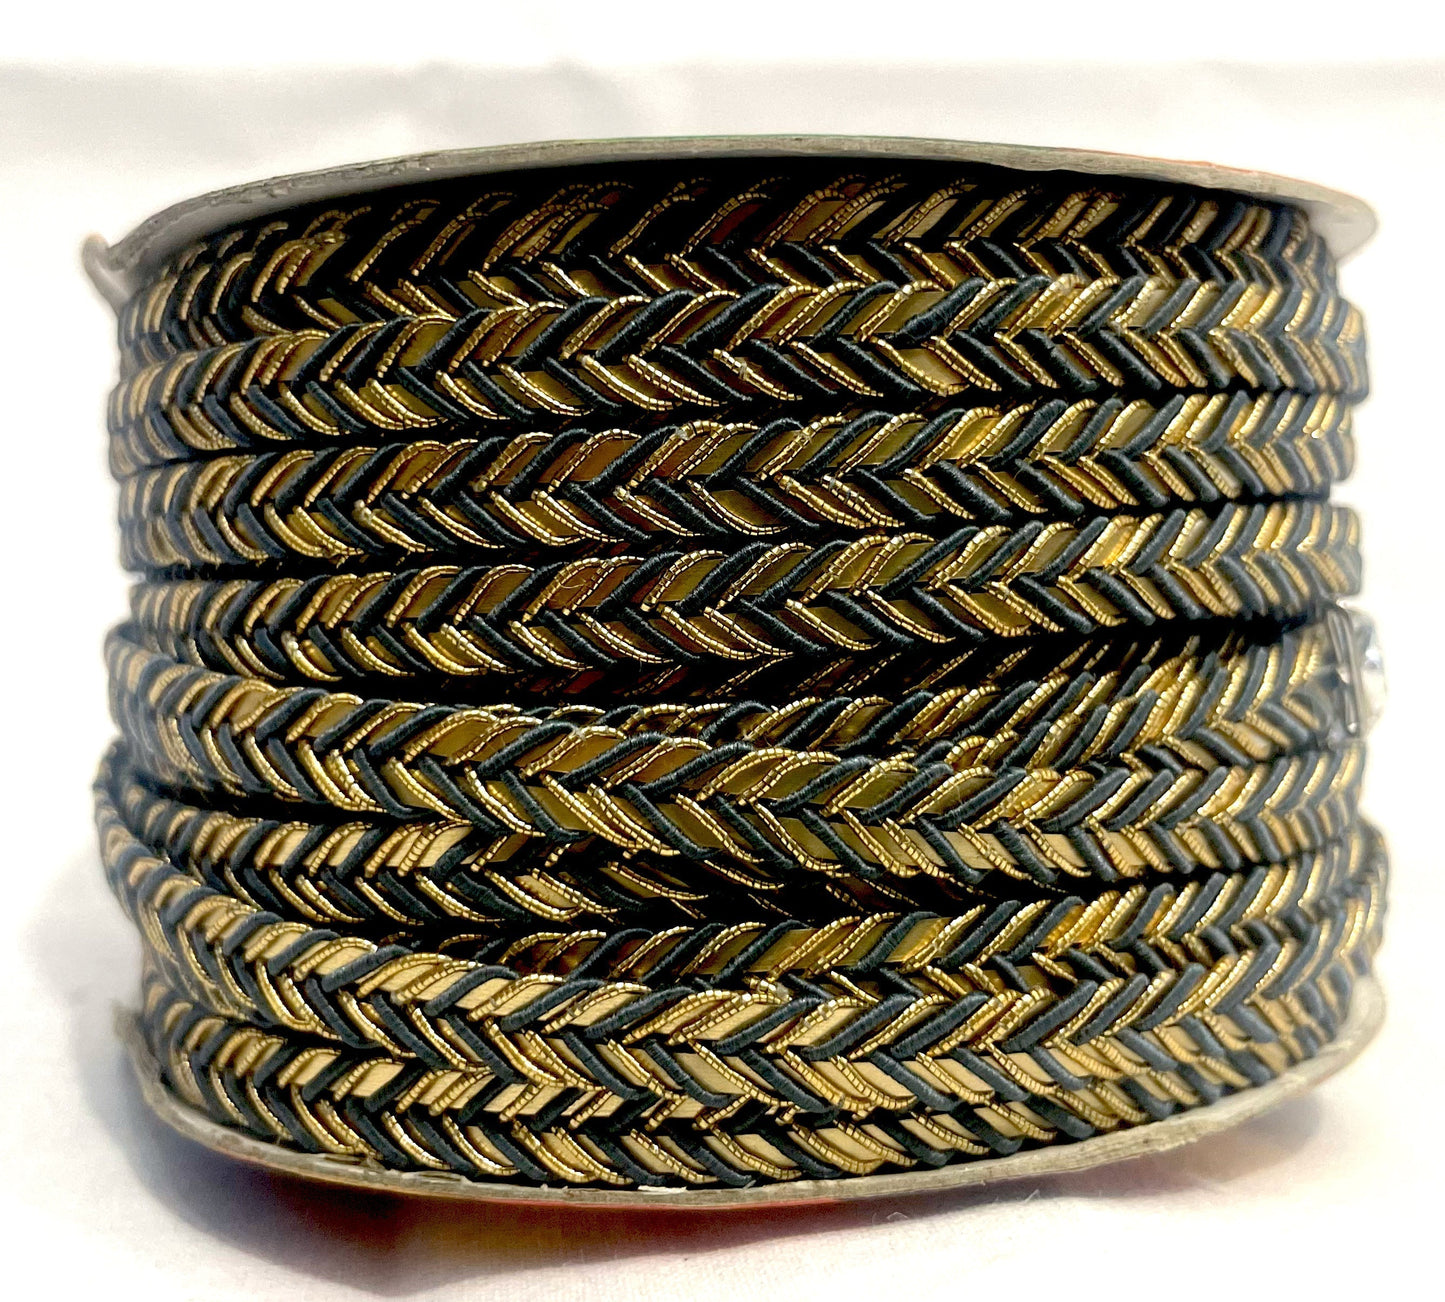 Golden Braid Border, Olive Green And Golden,  Laces for Dress, Home Décor, Shoe, Bags, Hats, DIY, Handmade, 0.2 inch Broad